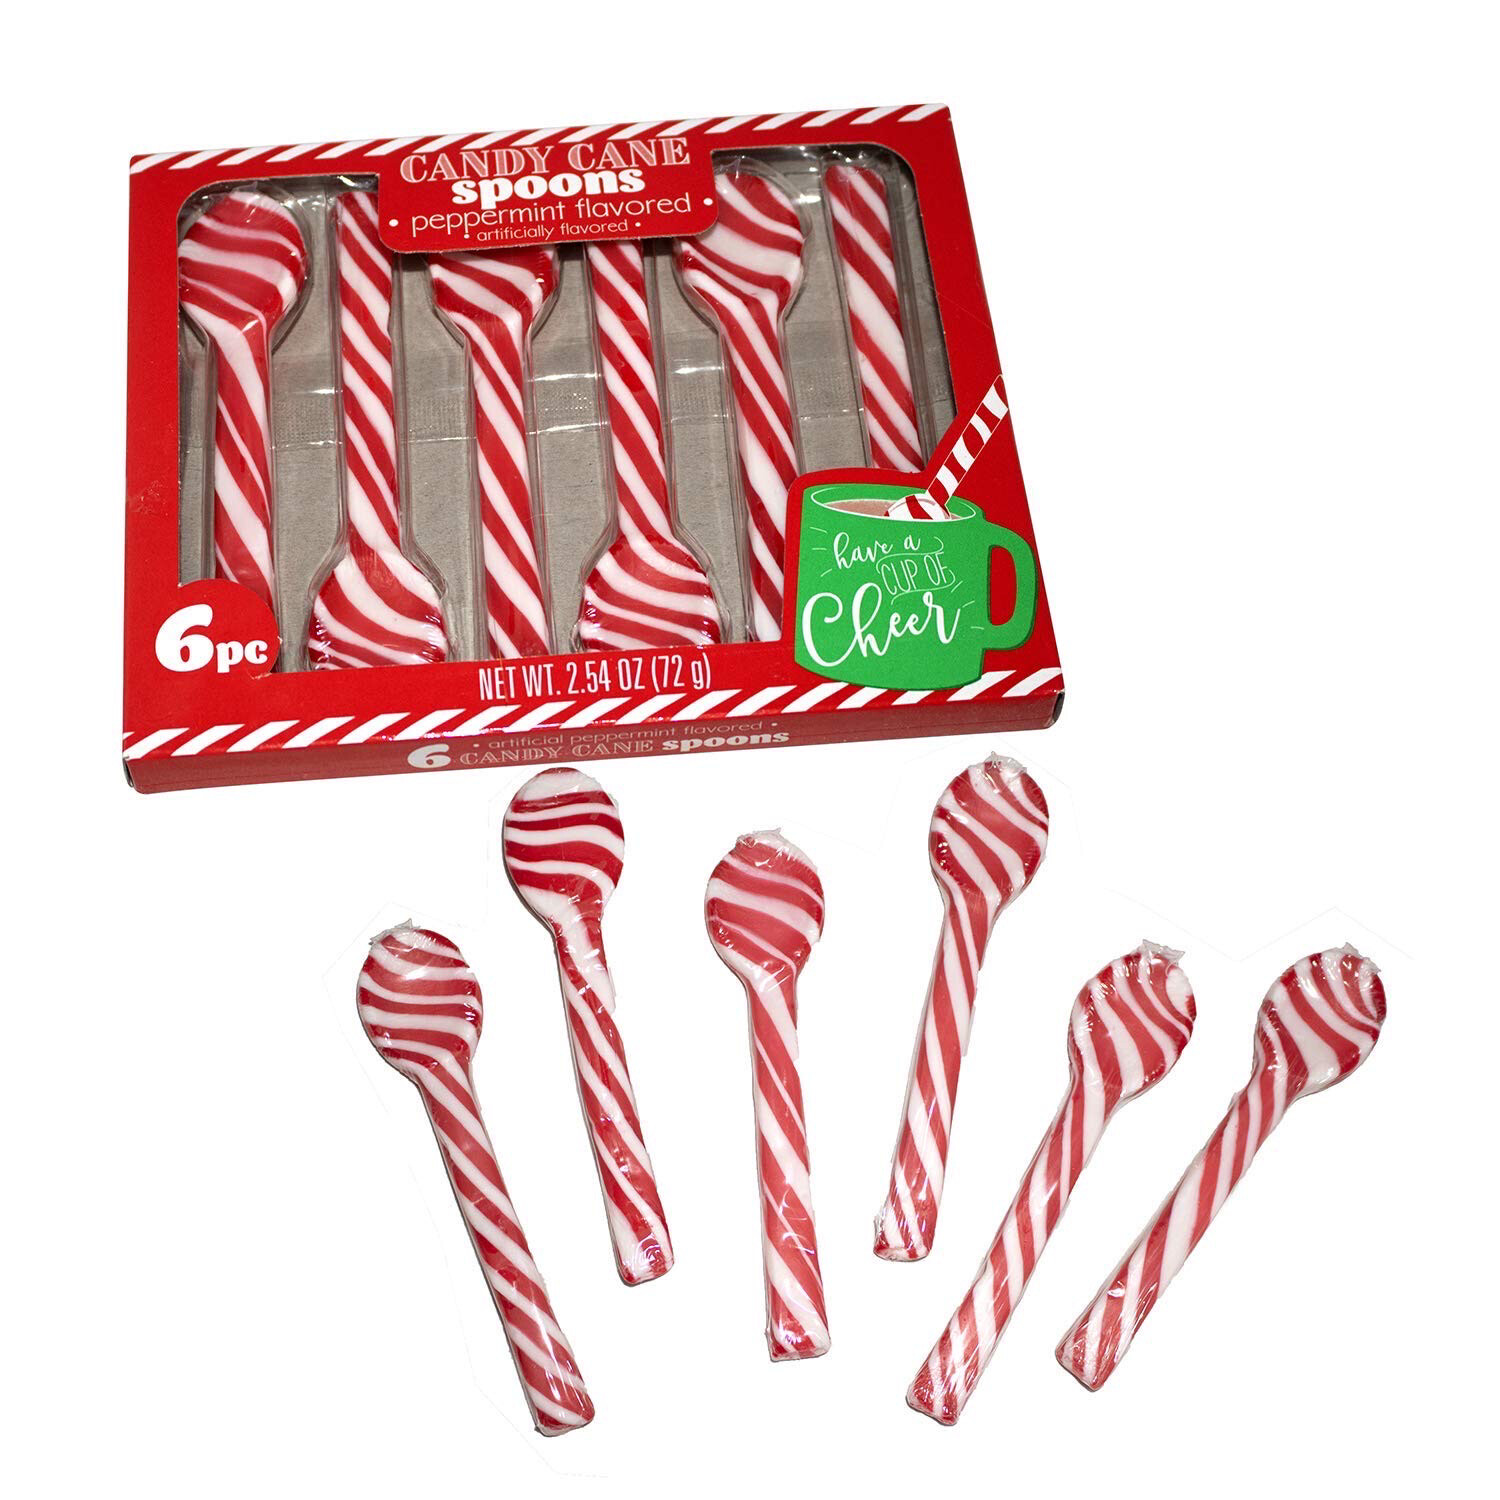 Candy Cane Spoons Peppermint Flavored 6 pack 